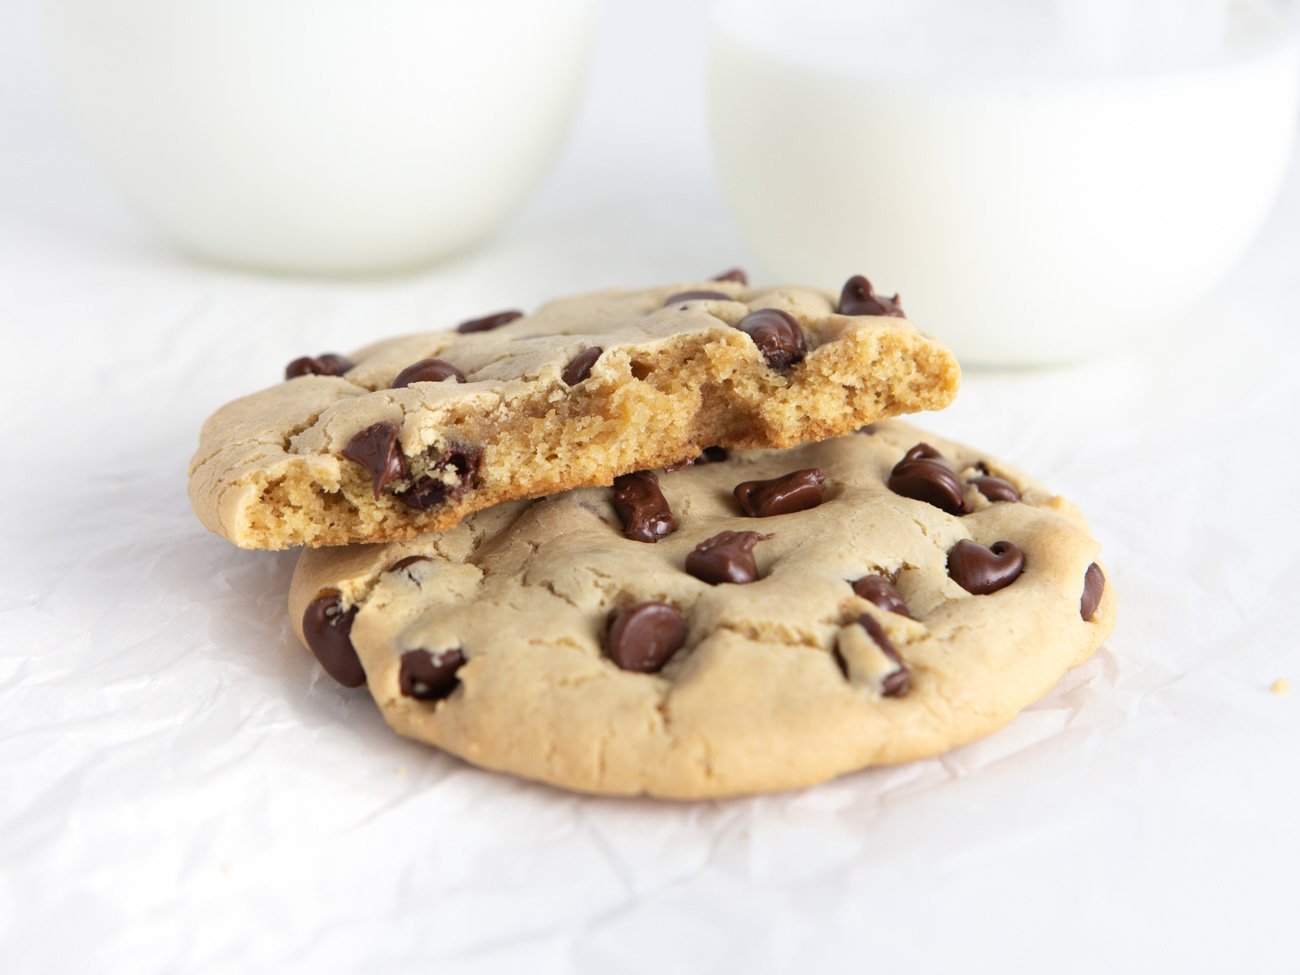 Inside soft texture of Chocolate Chip Cookies for Two